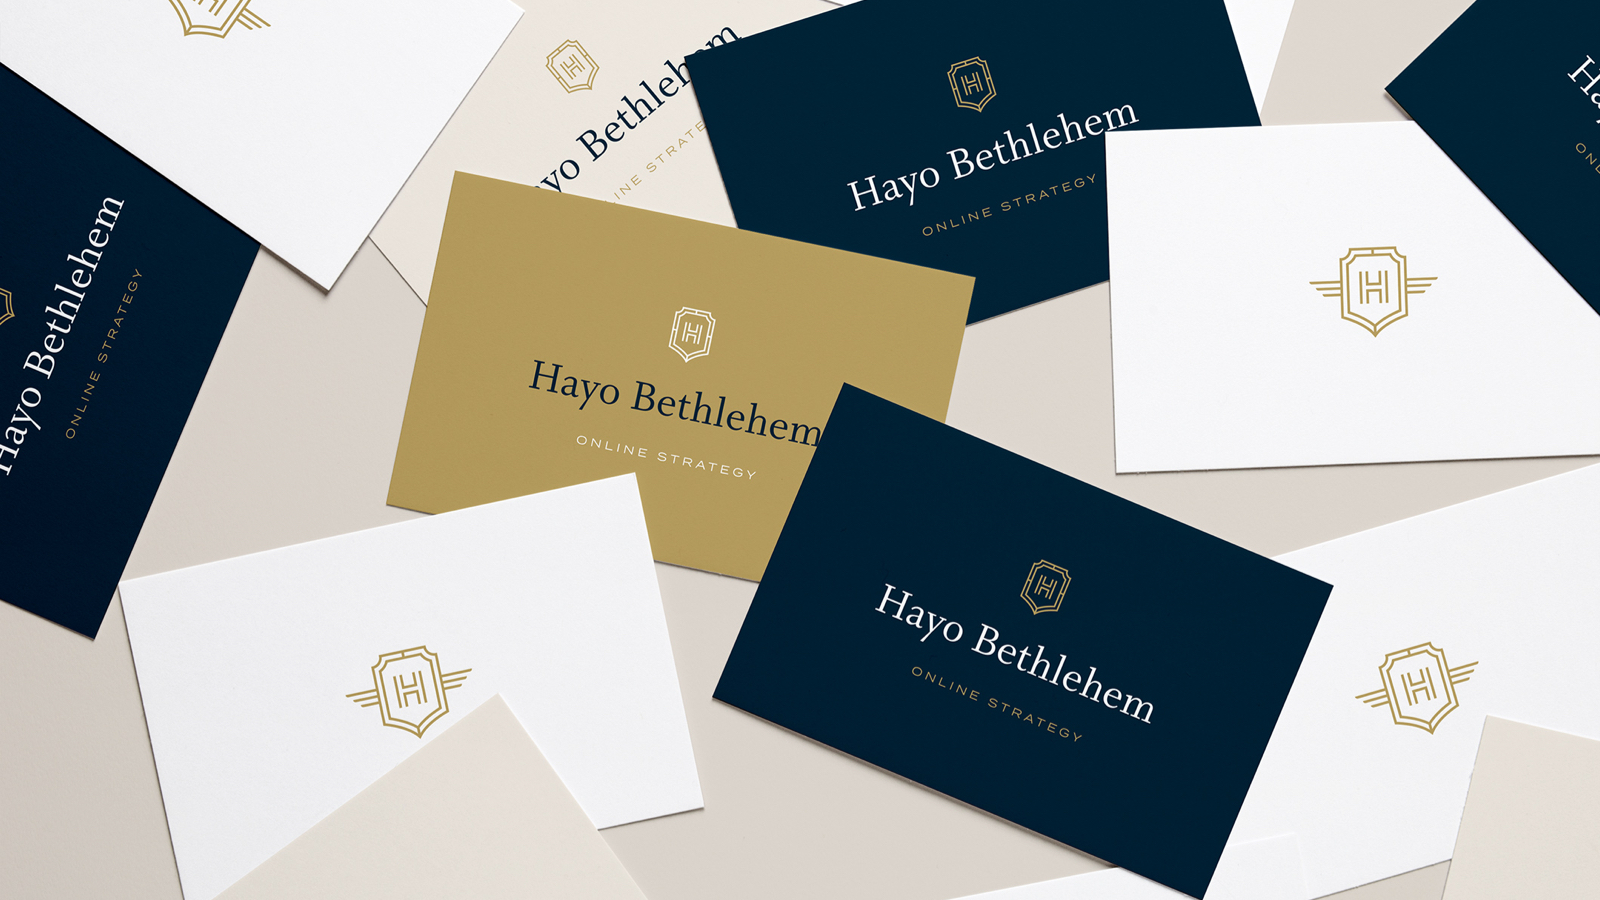 A sophisticated brand update for online strategist Hayo Bethlehem by Haelsum